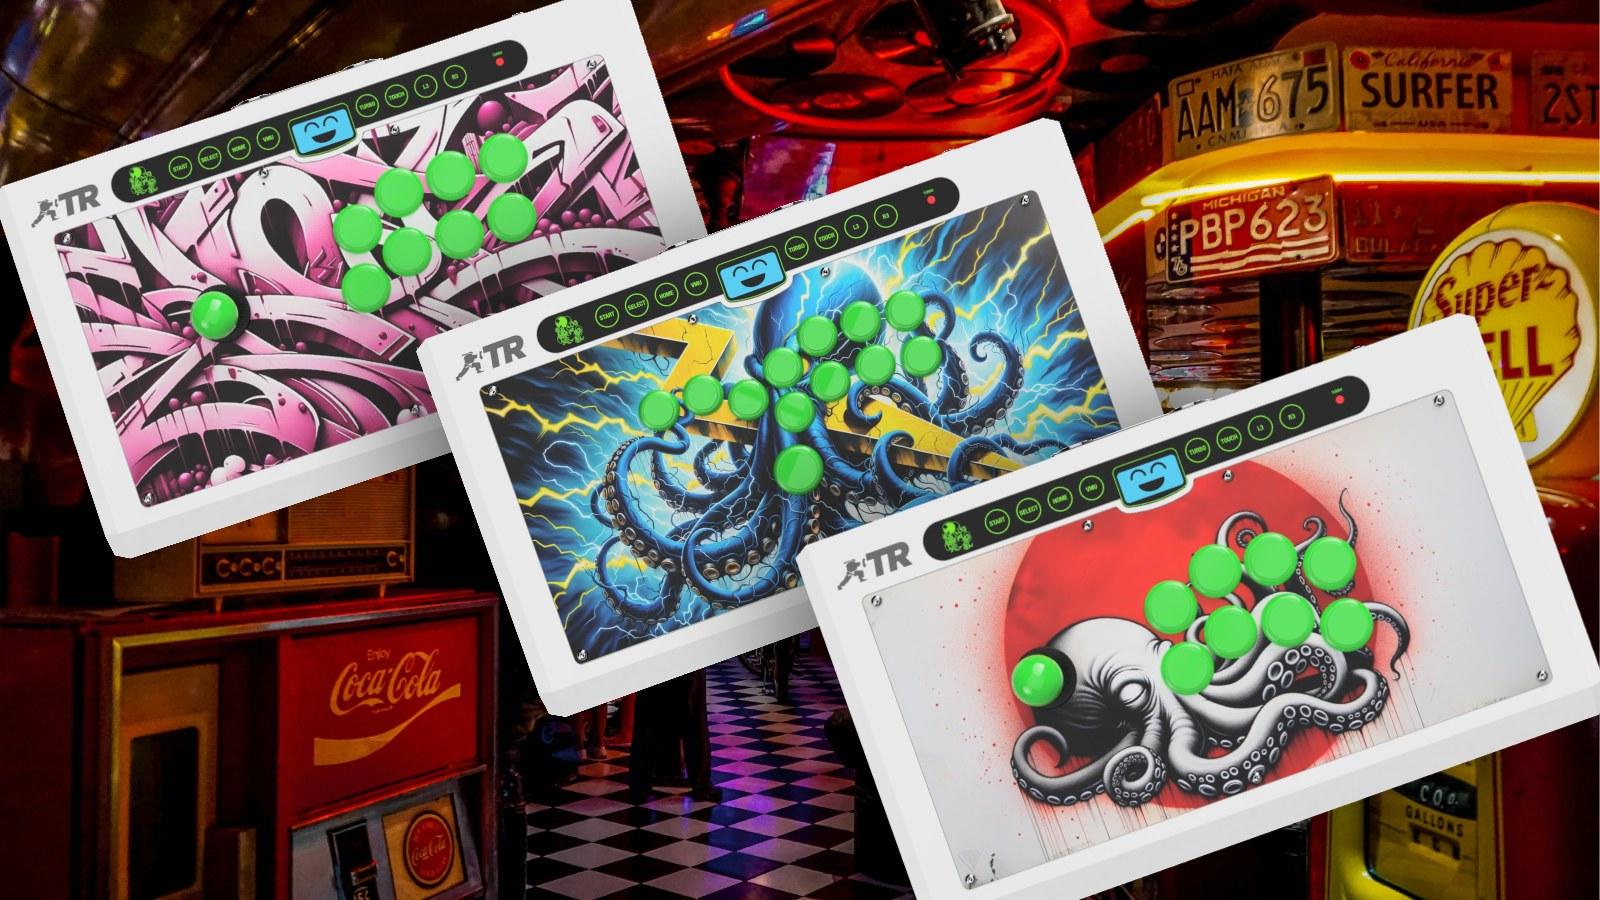 TR Octopus arcade stick in Viewlix, Noir and Hitbox layouts on arcade background